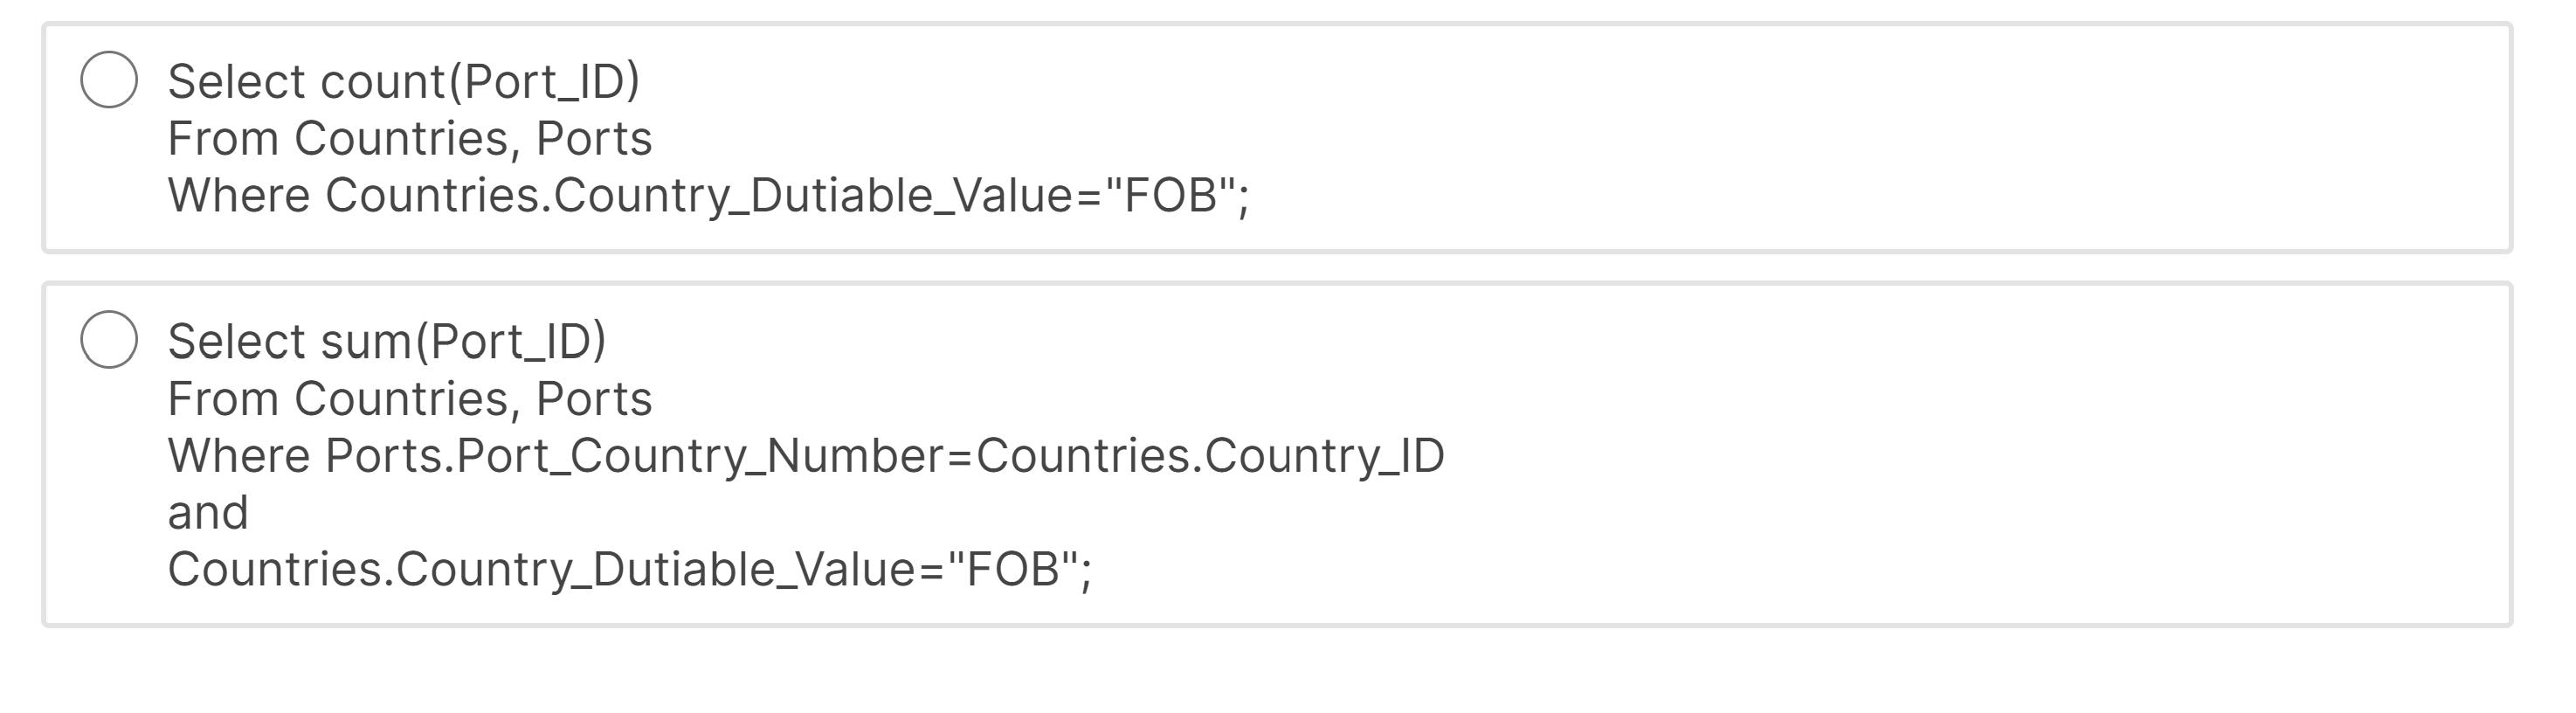 O Select count(Port_ID) From Countries, Ports Where Countries.Country_Dutiable_Value=FOB; Select sum(Port_ID) From Countrie